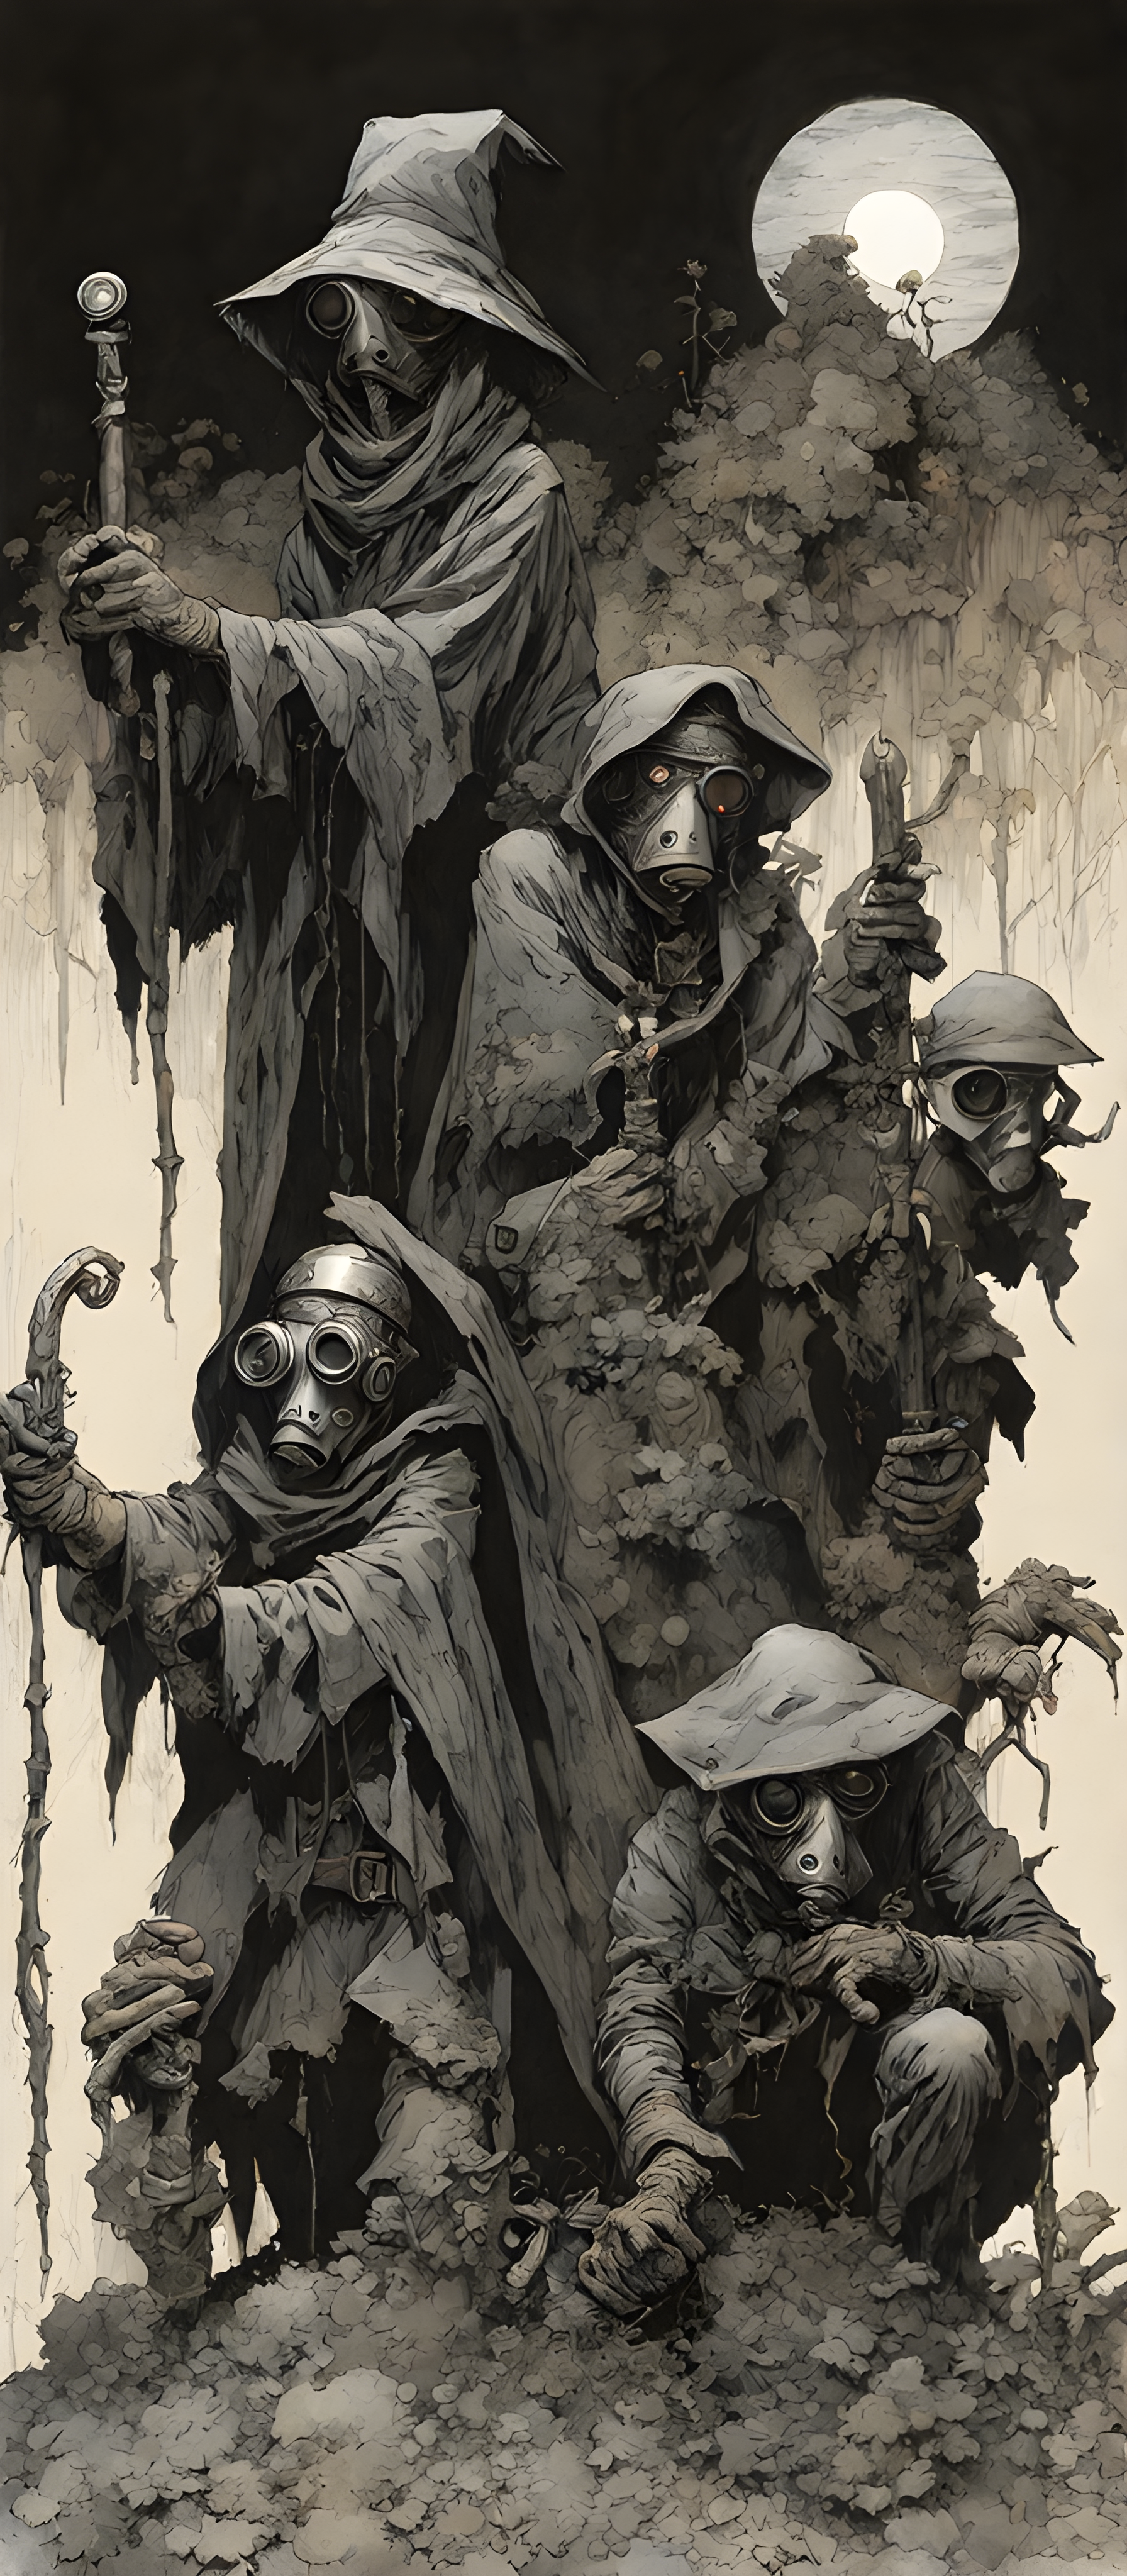 Grave robbers  ww1 gas masks  plague doctors  gothic by bernie wrightson  brian froud  kelley jones  mike mignola  p. craig russell  dave mckean  richard corben perfect eyes  perfect handsface  highly detailed  dynamic pose  dark  broken glas